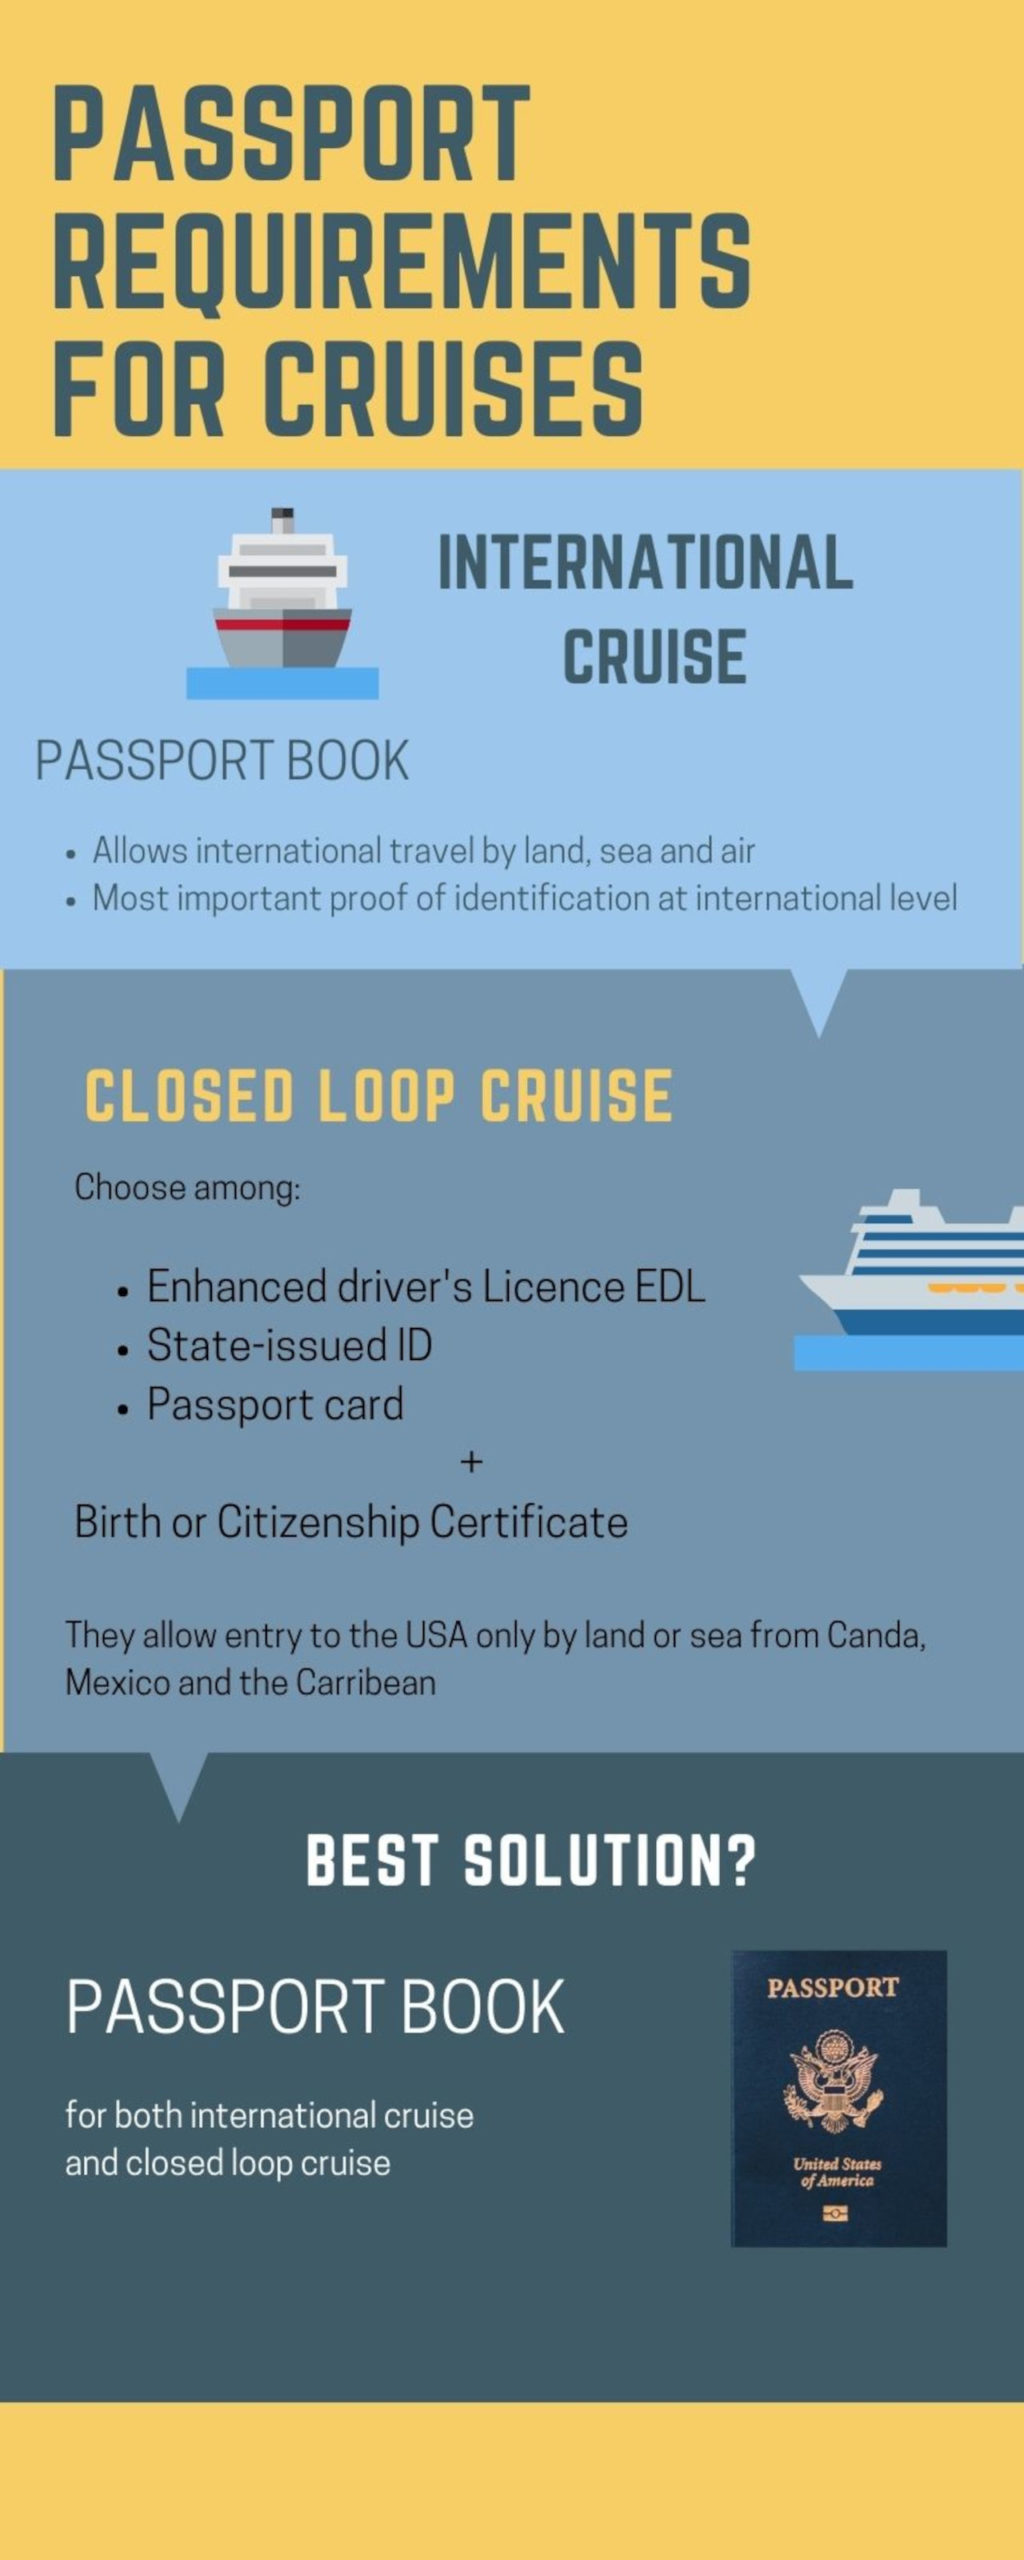 does a closed loop cruise require a passport